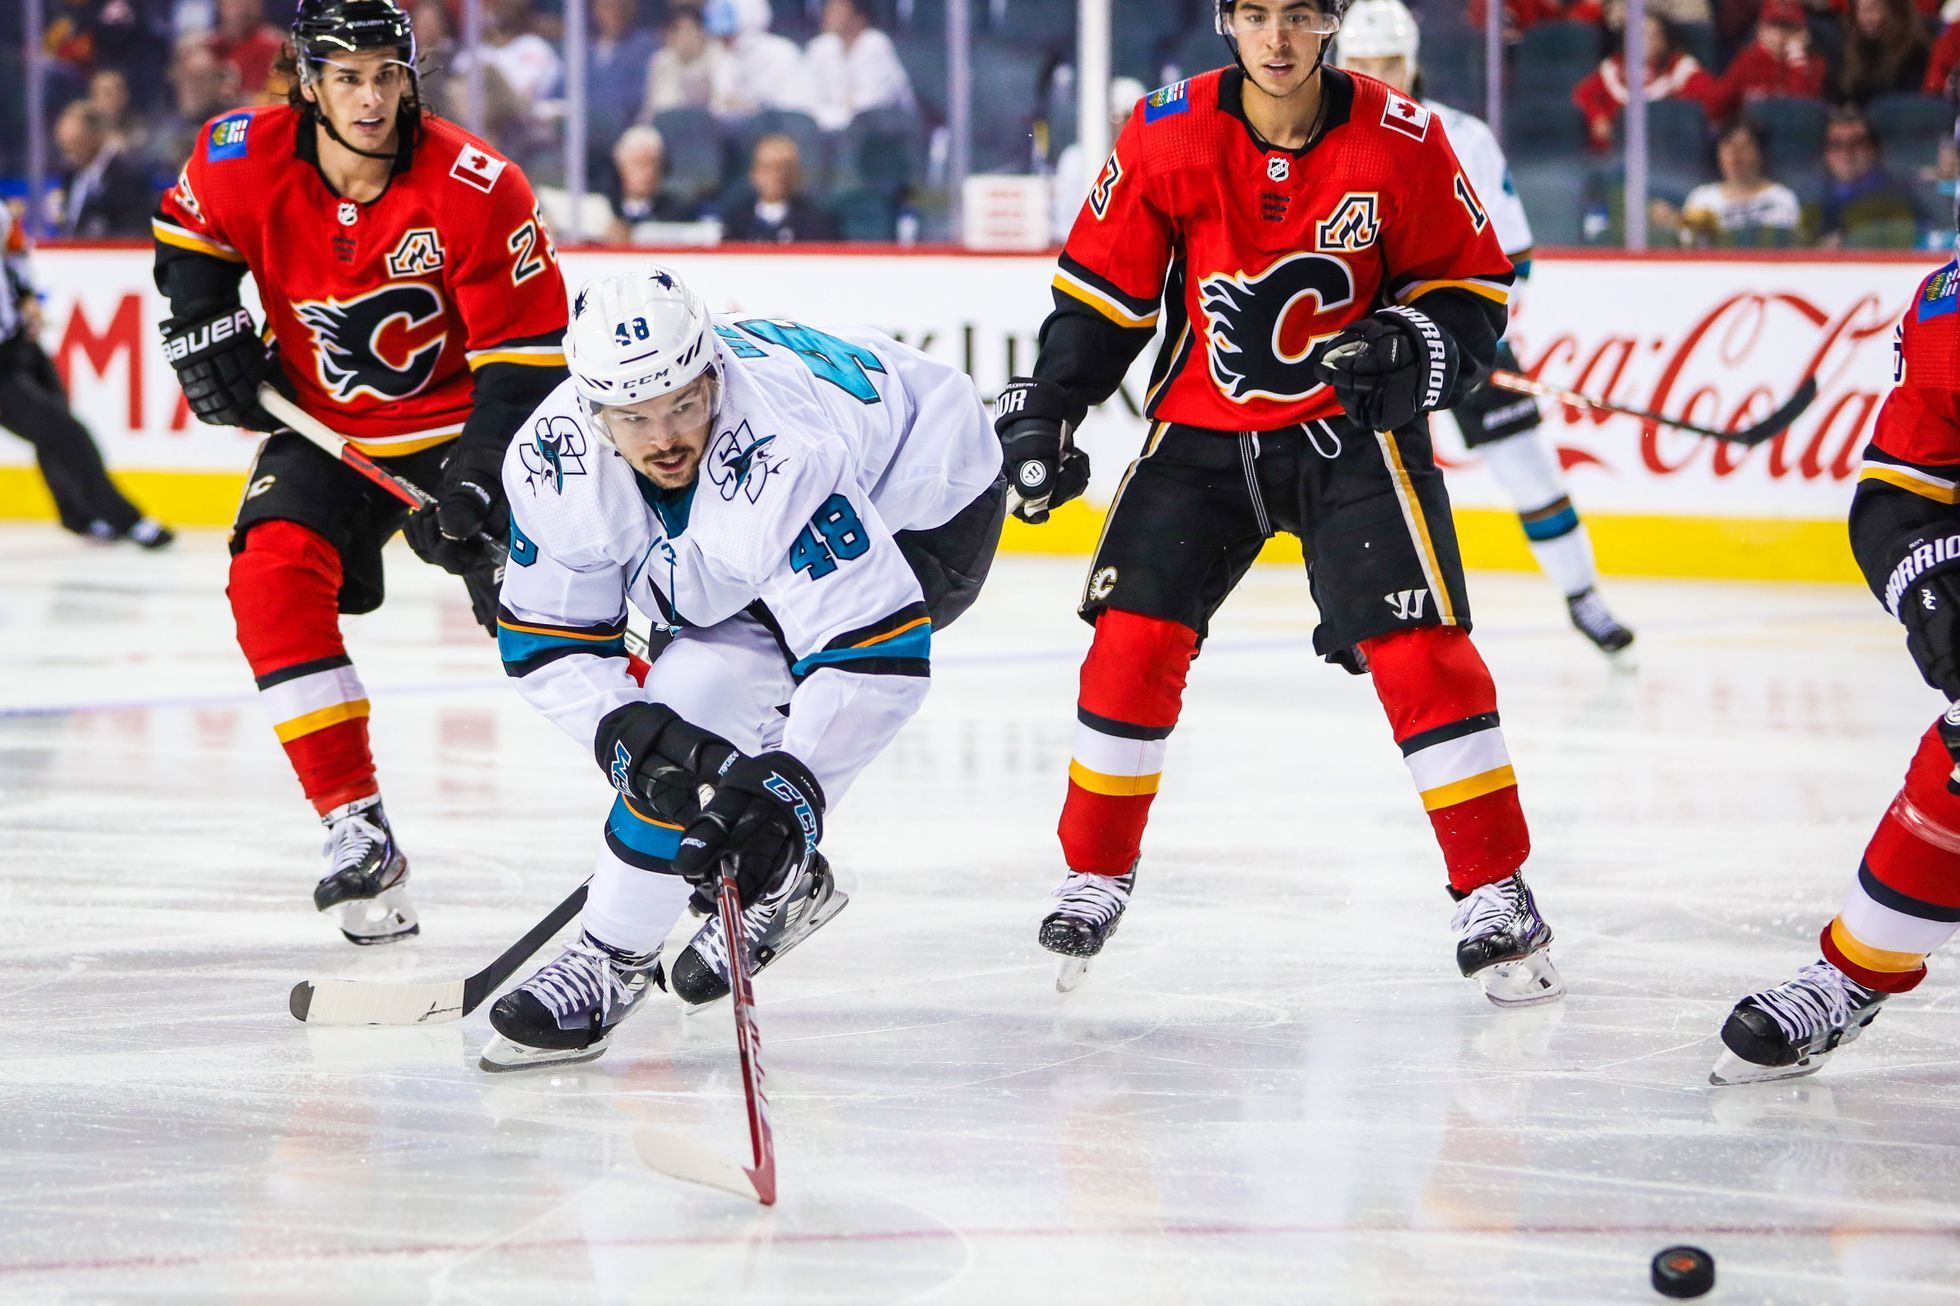 Sep 18, 2019; Calgary, Alberta, CAN; San Jose Sharks center Tomáš Hertl (48) reach for the puck against the Calgary Flames during the second period at Scotiabank Saddledo